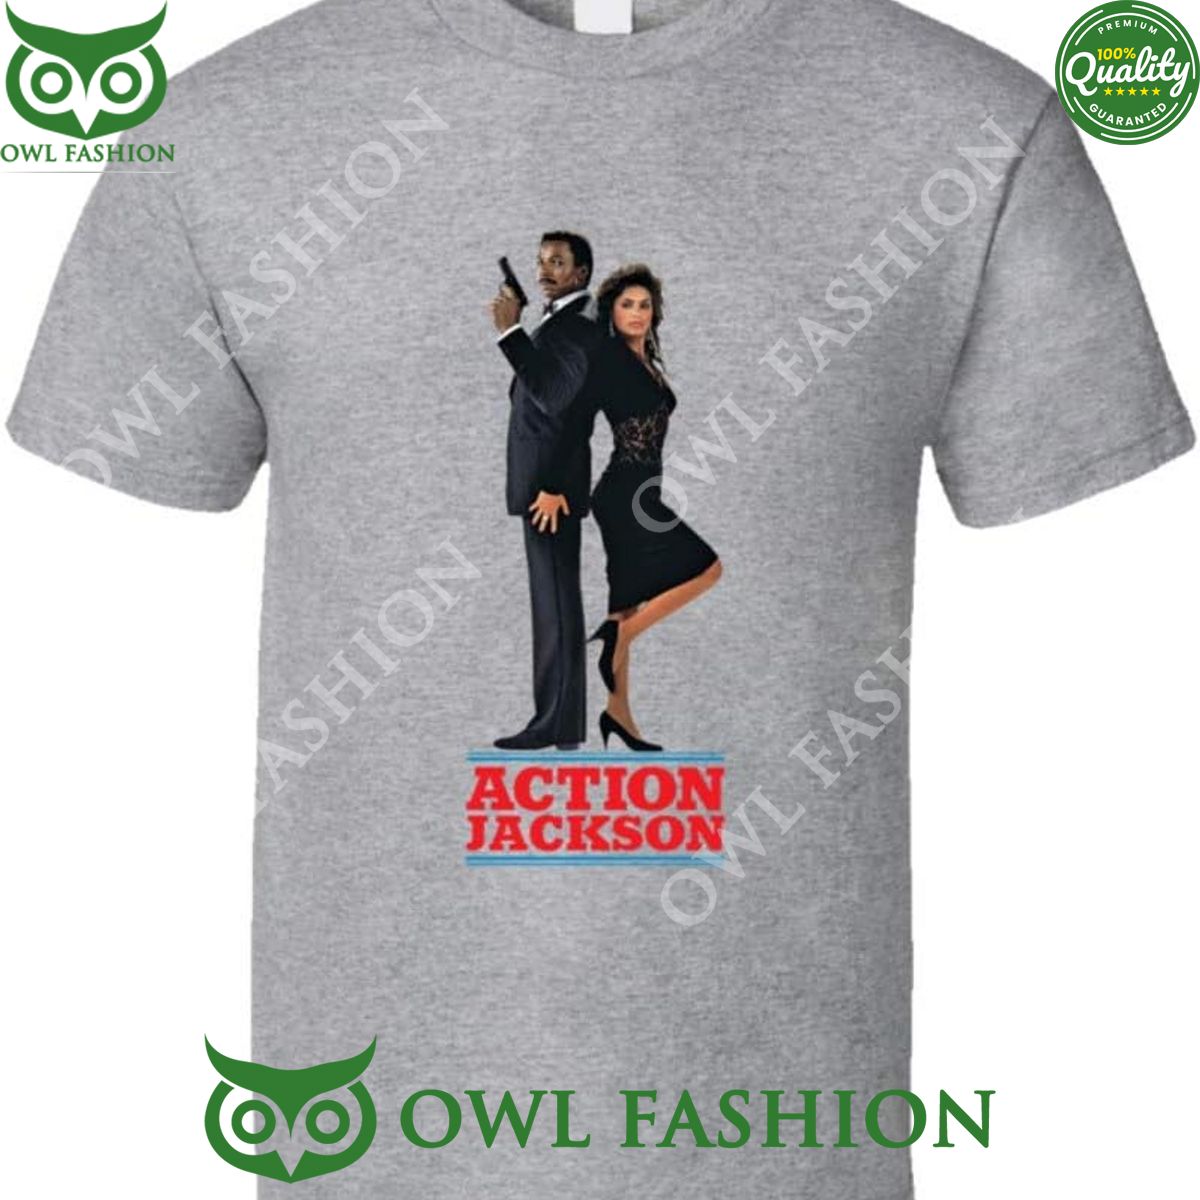 Action Jackson Carl Weathers 80s Action Movie T Shirt